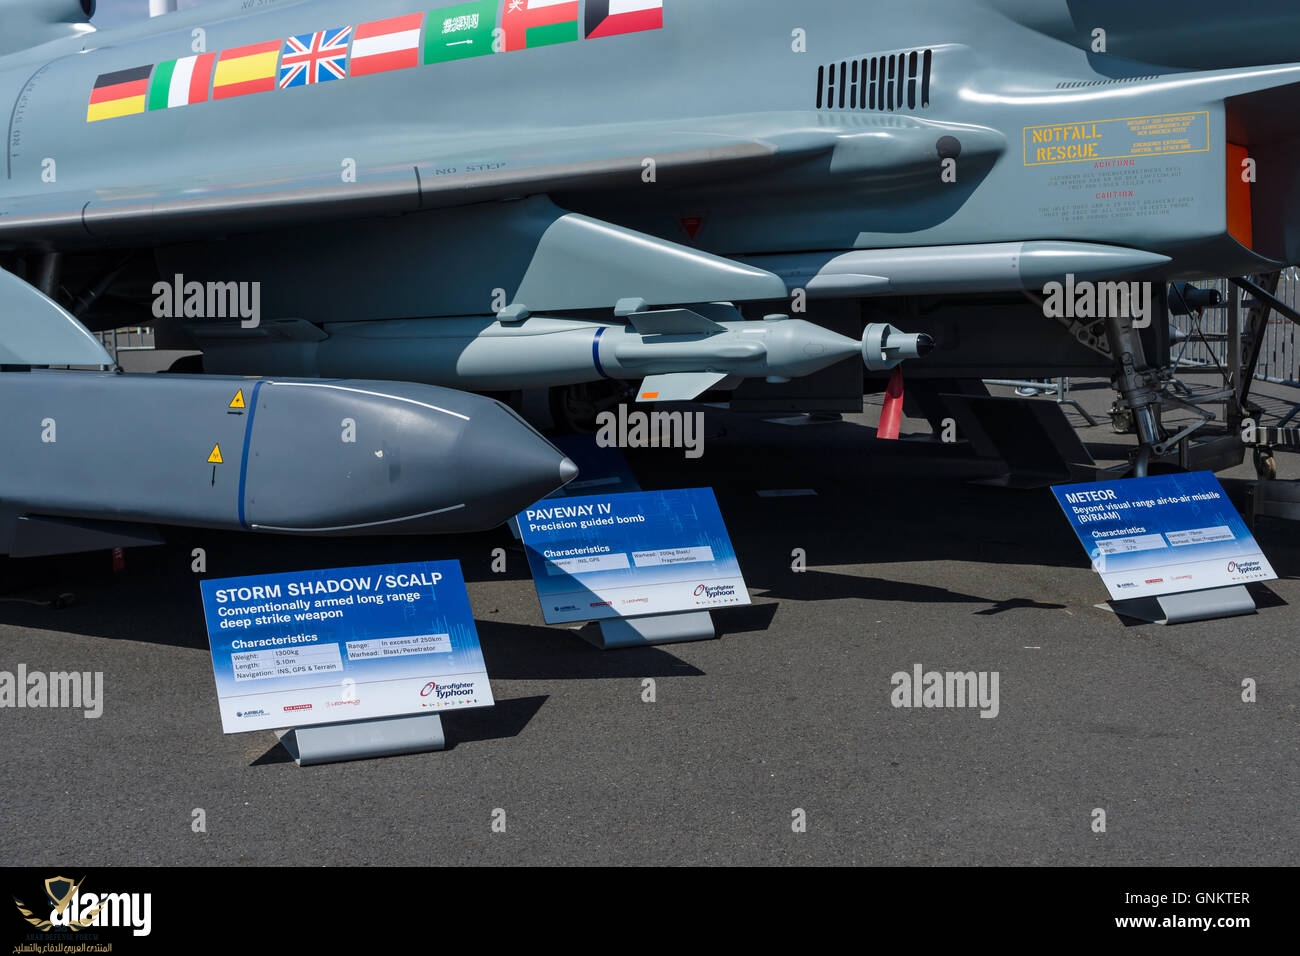 samples-of-the-suspension-arms-missiles-and-aerial-bombs-of-multirole-GNKTER.jpg